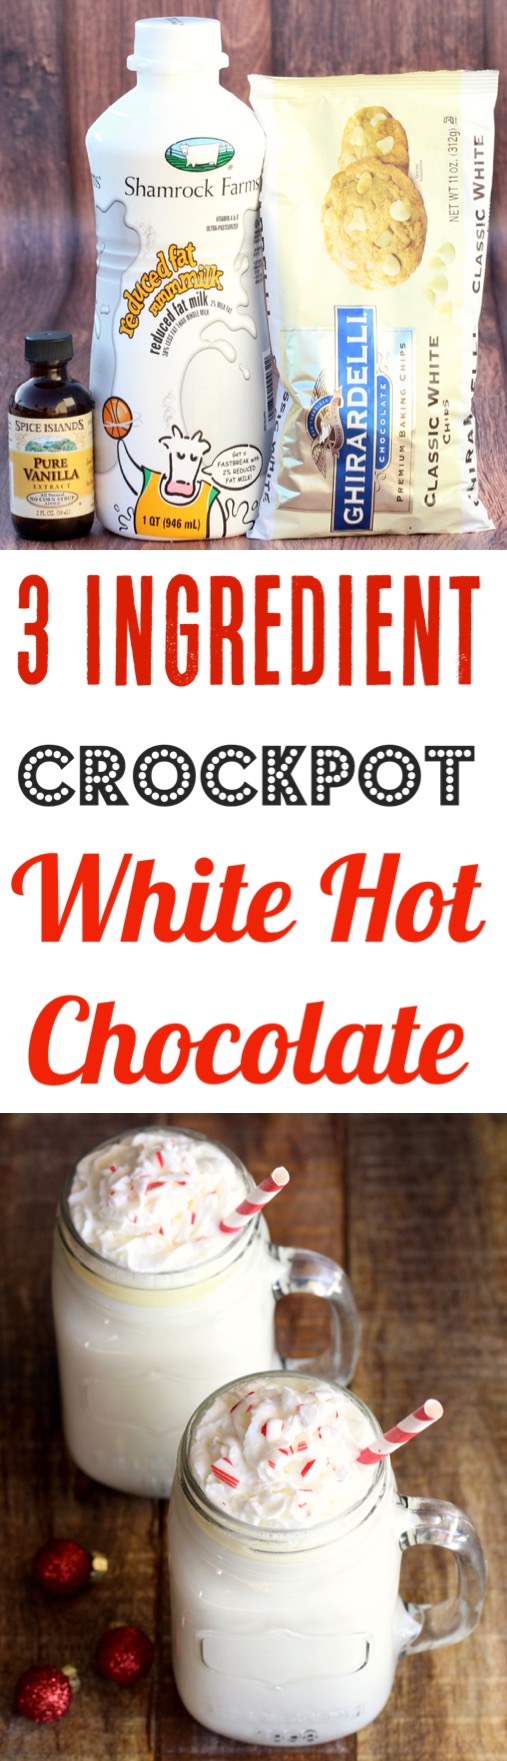 Crockpot White Hot Chocolate Recipe Easy Slow Cooker Party Drink